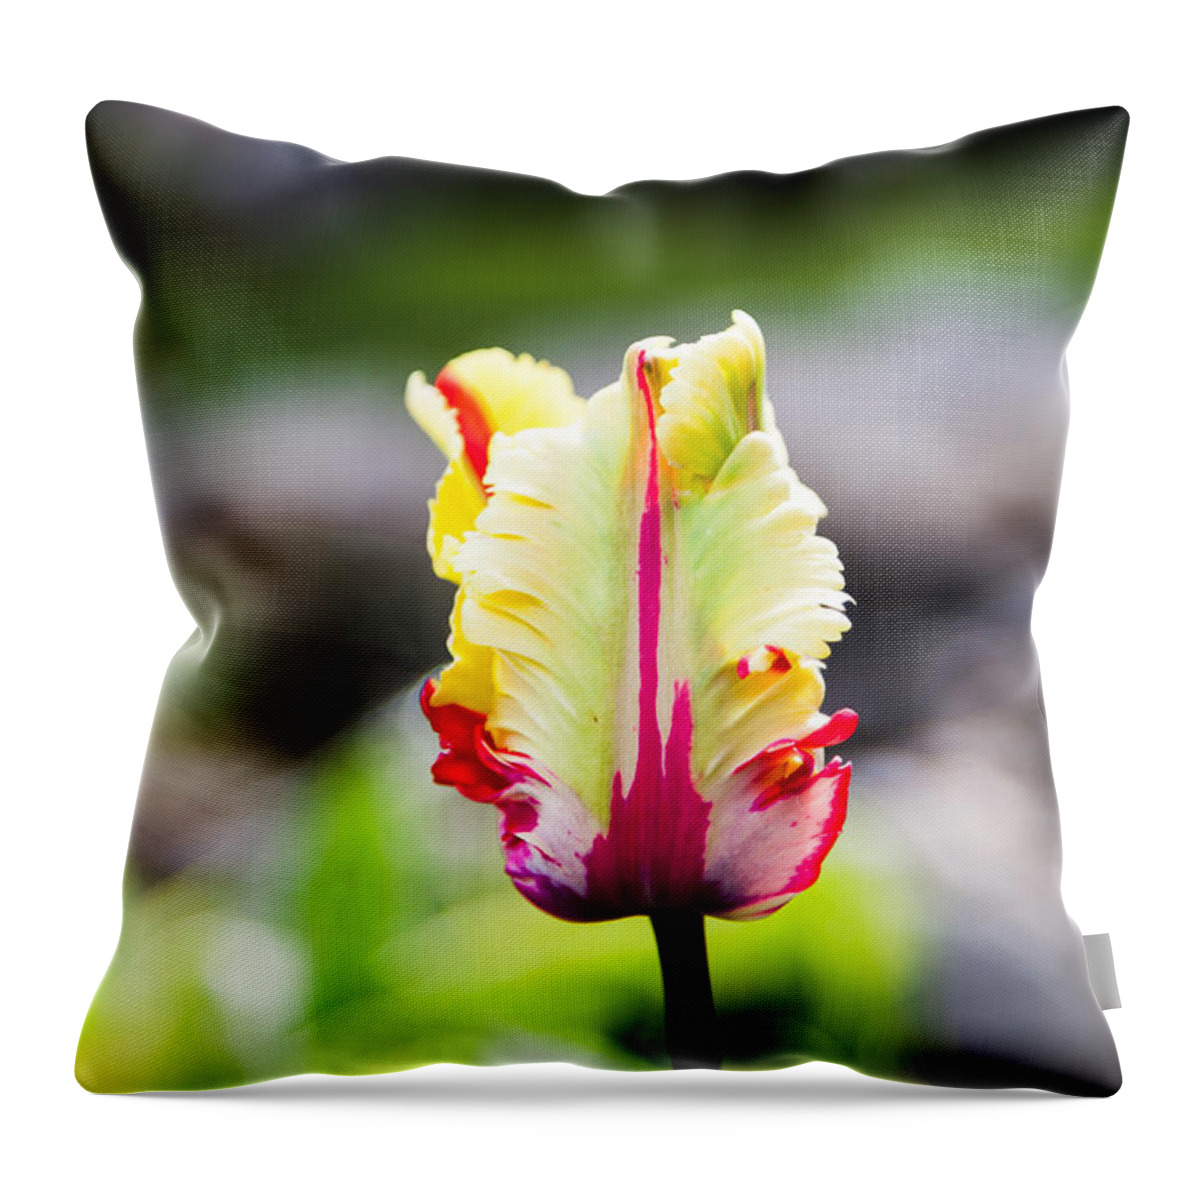 Bellingham Throw Pillow featuring the photograph Ruffles and Ridges by Judy Wright Lott